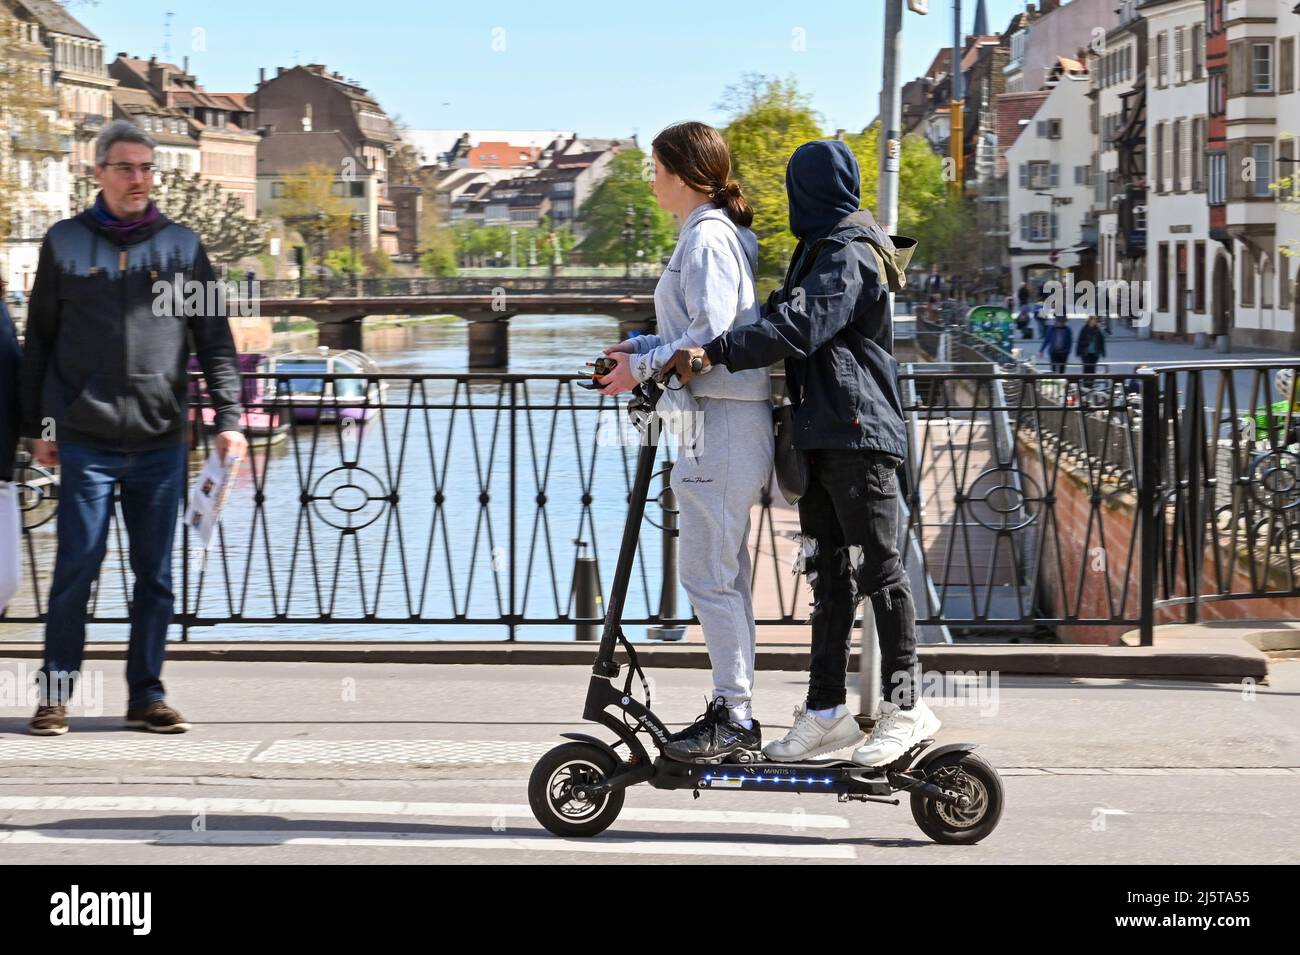 Strasbourg, France - April 2022: Two people rding on an electric scooter over a canal bridge in Strasbourg. Stock Photo